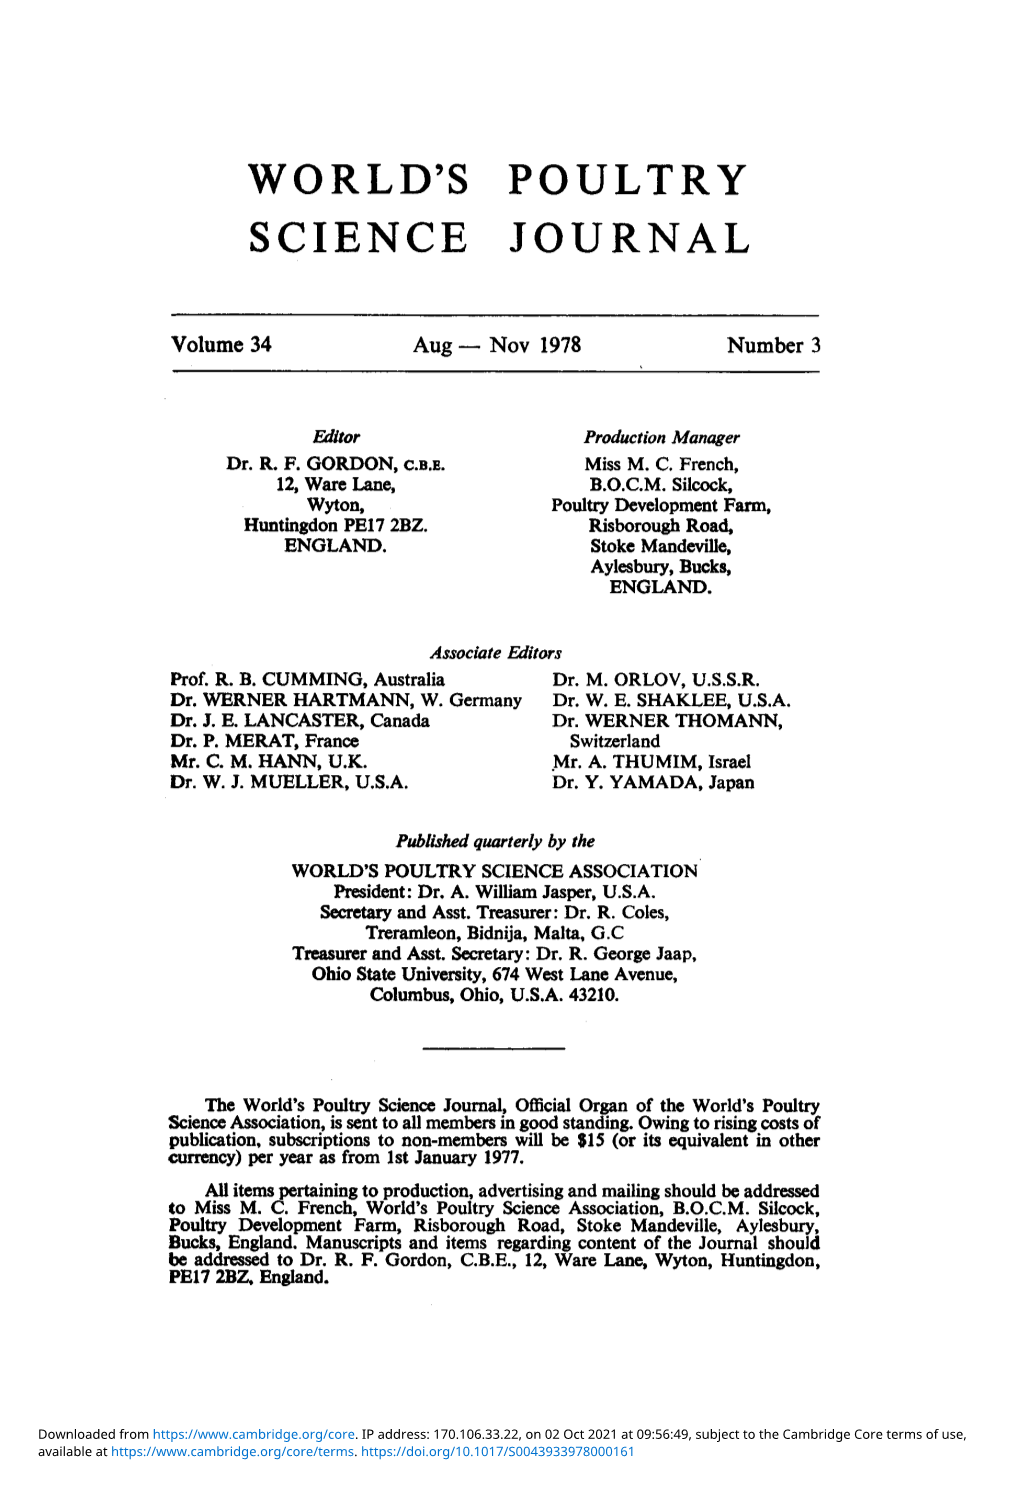 World's Poultry Science Journal